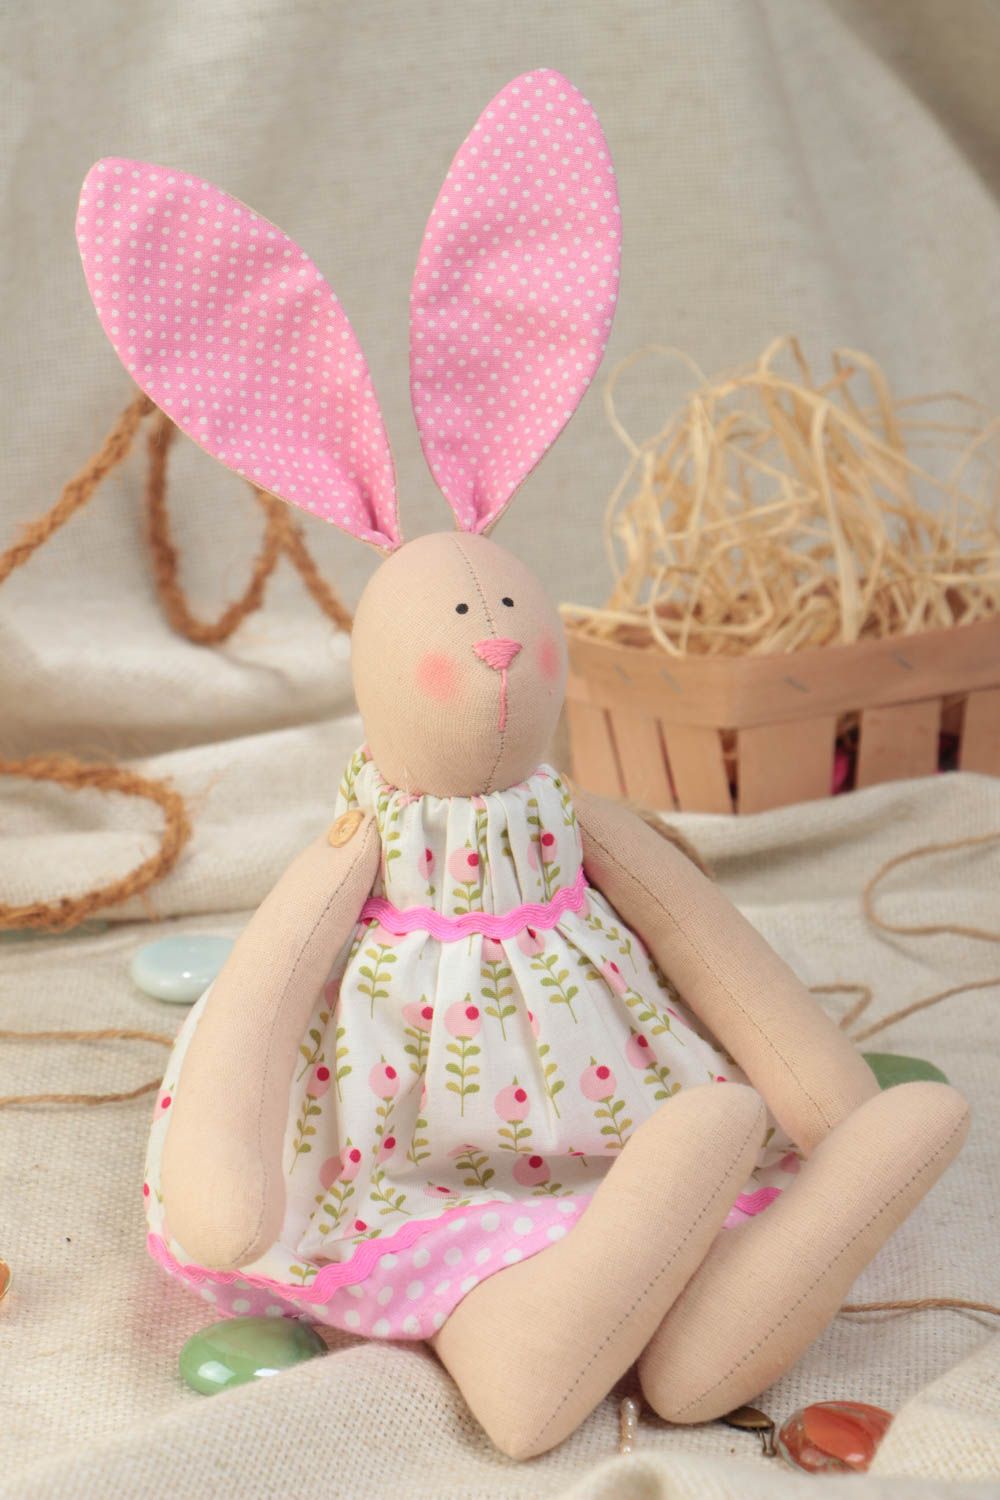 Handmade cotton fabric soft toy rabbit in floral dress with pink polka dot ears photo 1